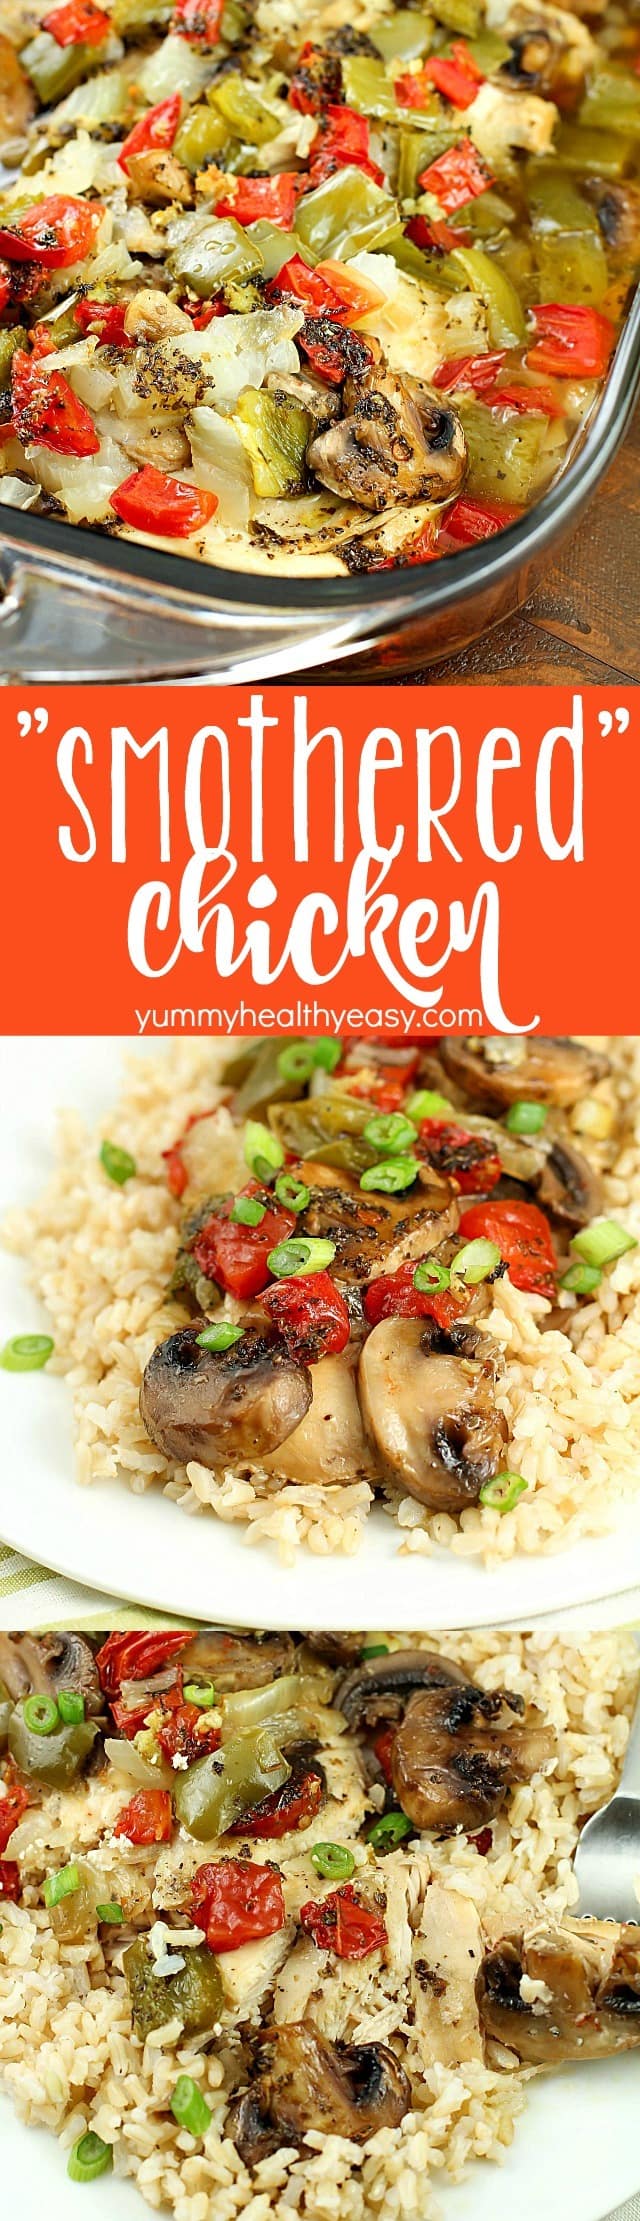 Baked "Smothered Chicken" may sound weird, but this is an incredibly easy and delicious one-pan, baked chicken dinner recipe that my family loves! It's healthy and high in protein and is low-carb & gluten-free without the side of rice. Super easy and no pre-cooking of the meat, just throw it all in the pan and bake! It comes out juicy and flavorful!